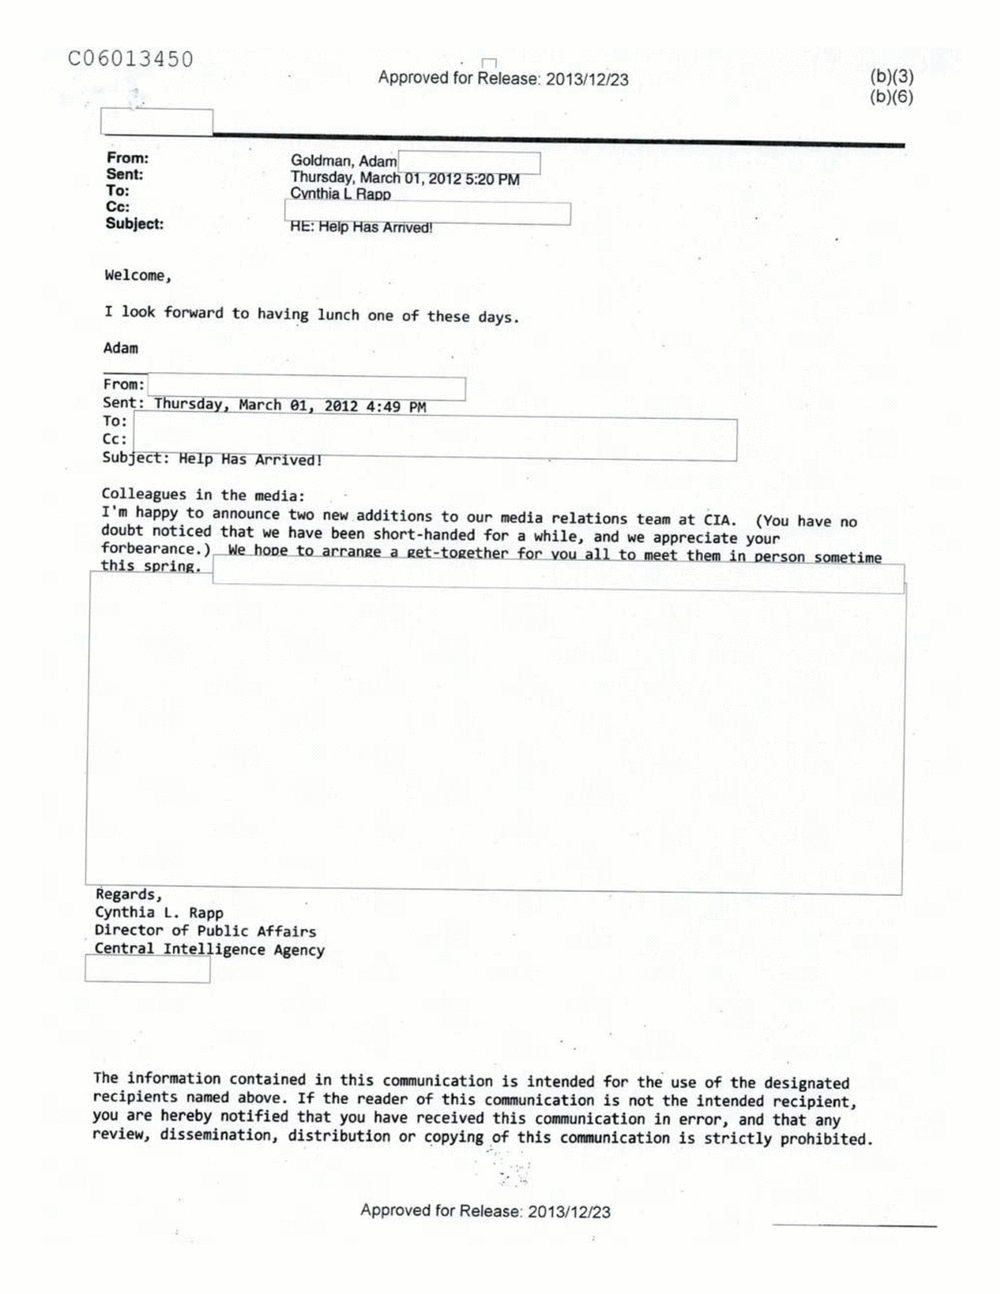 Page 317 from Email Correspondence Between Reporters and CIA Flacks